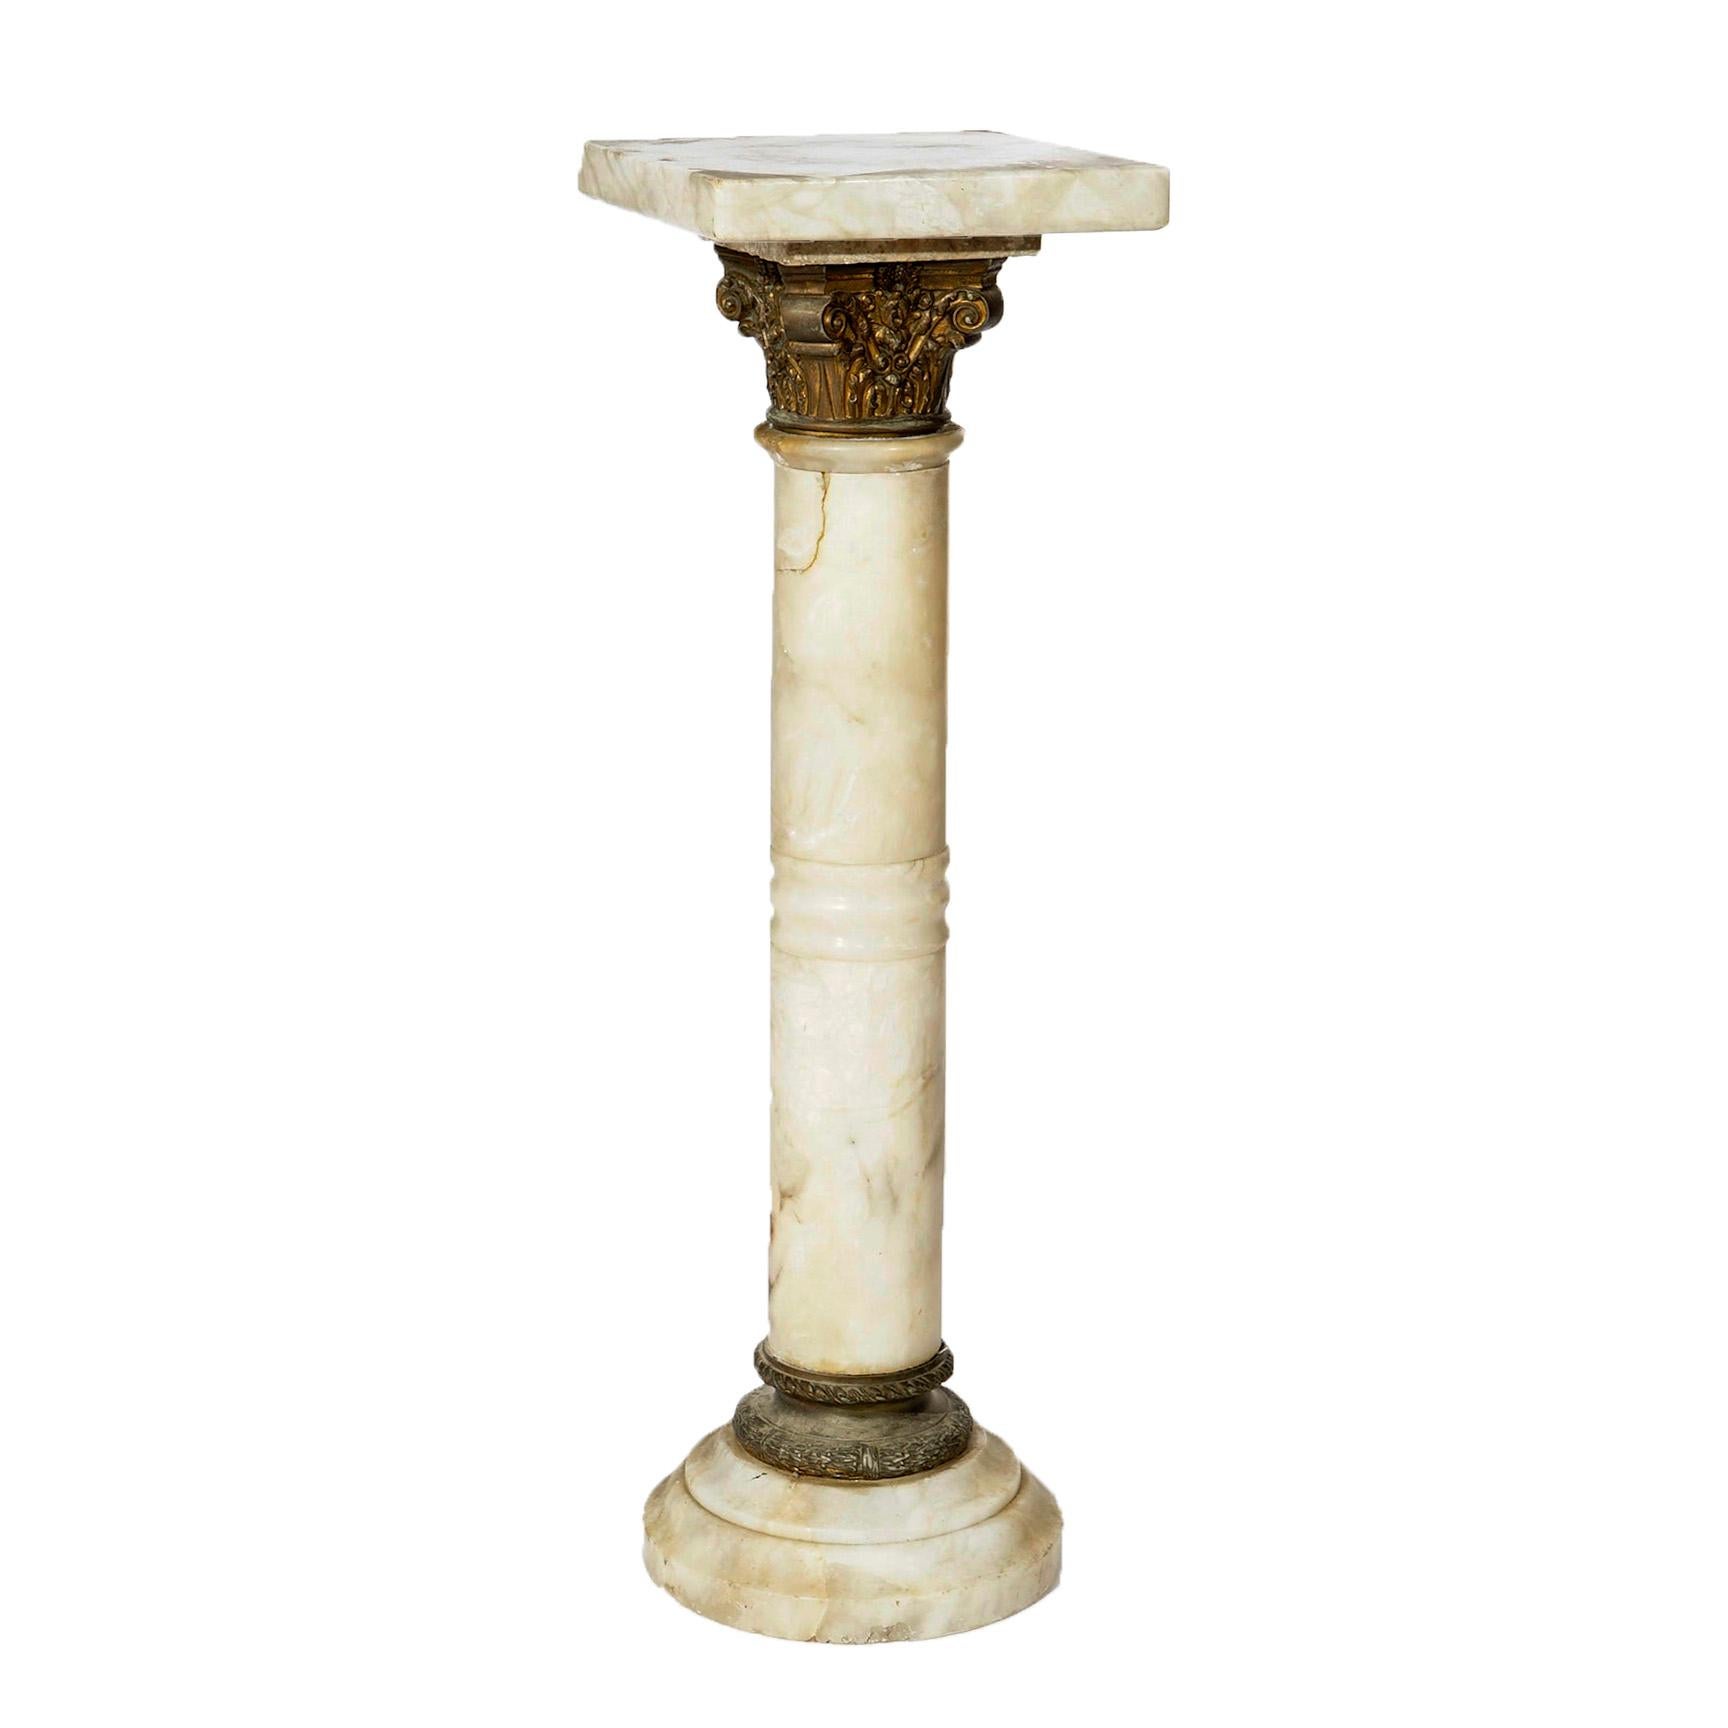 An antique Classical Greco-Roman sculpture pedestal offers marble construction in Corinthian form with square display over banded column having cast bronze mounts and raised on circular stepped base, circa 1890

Measures- 37''H x 11.5''W x 11.5''D.